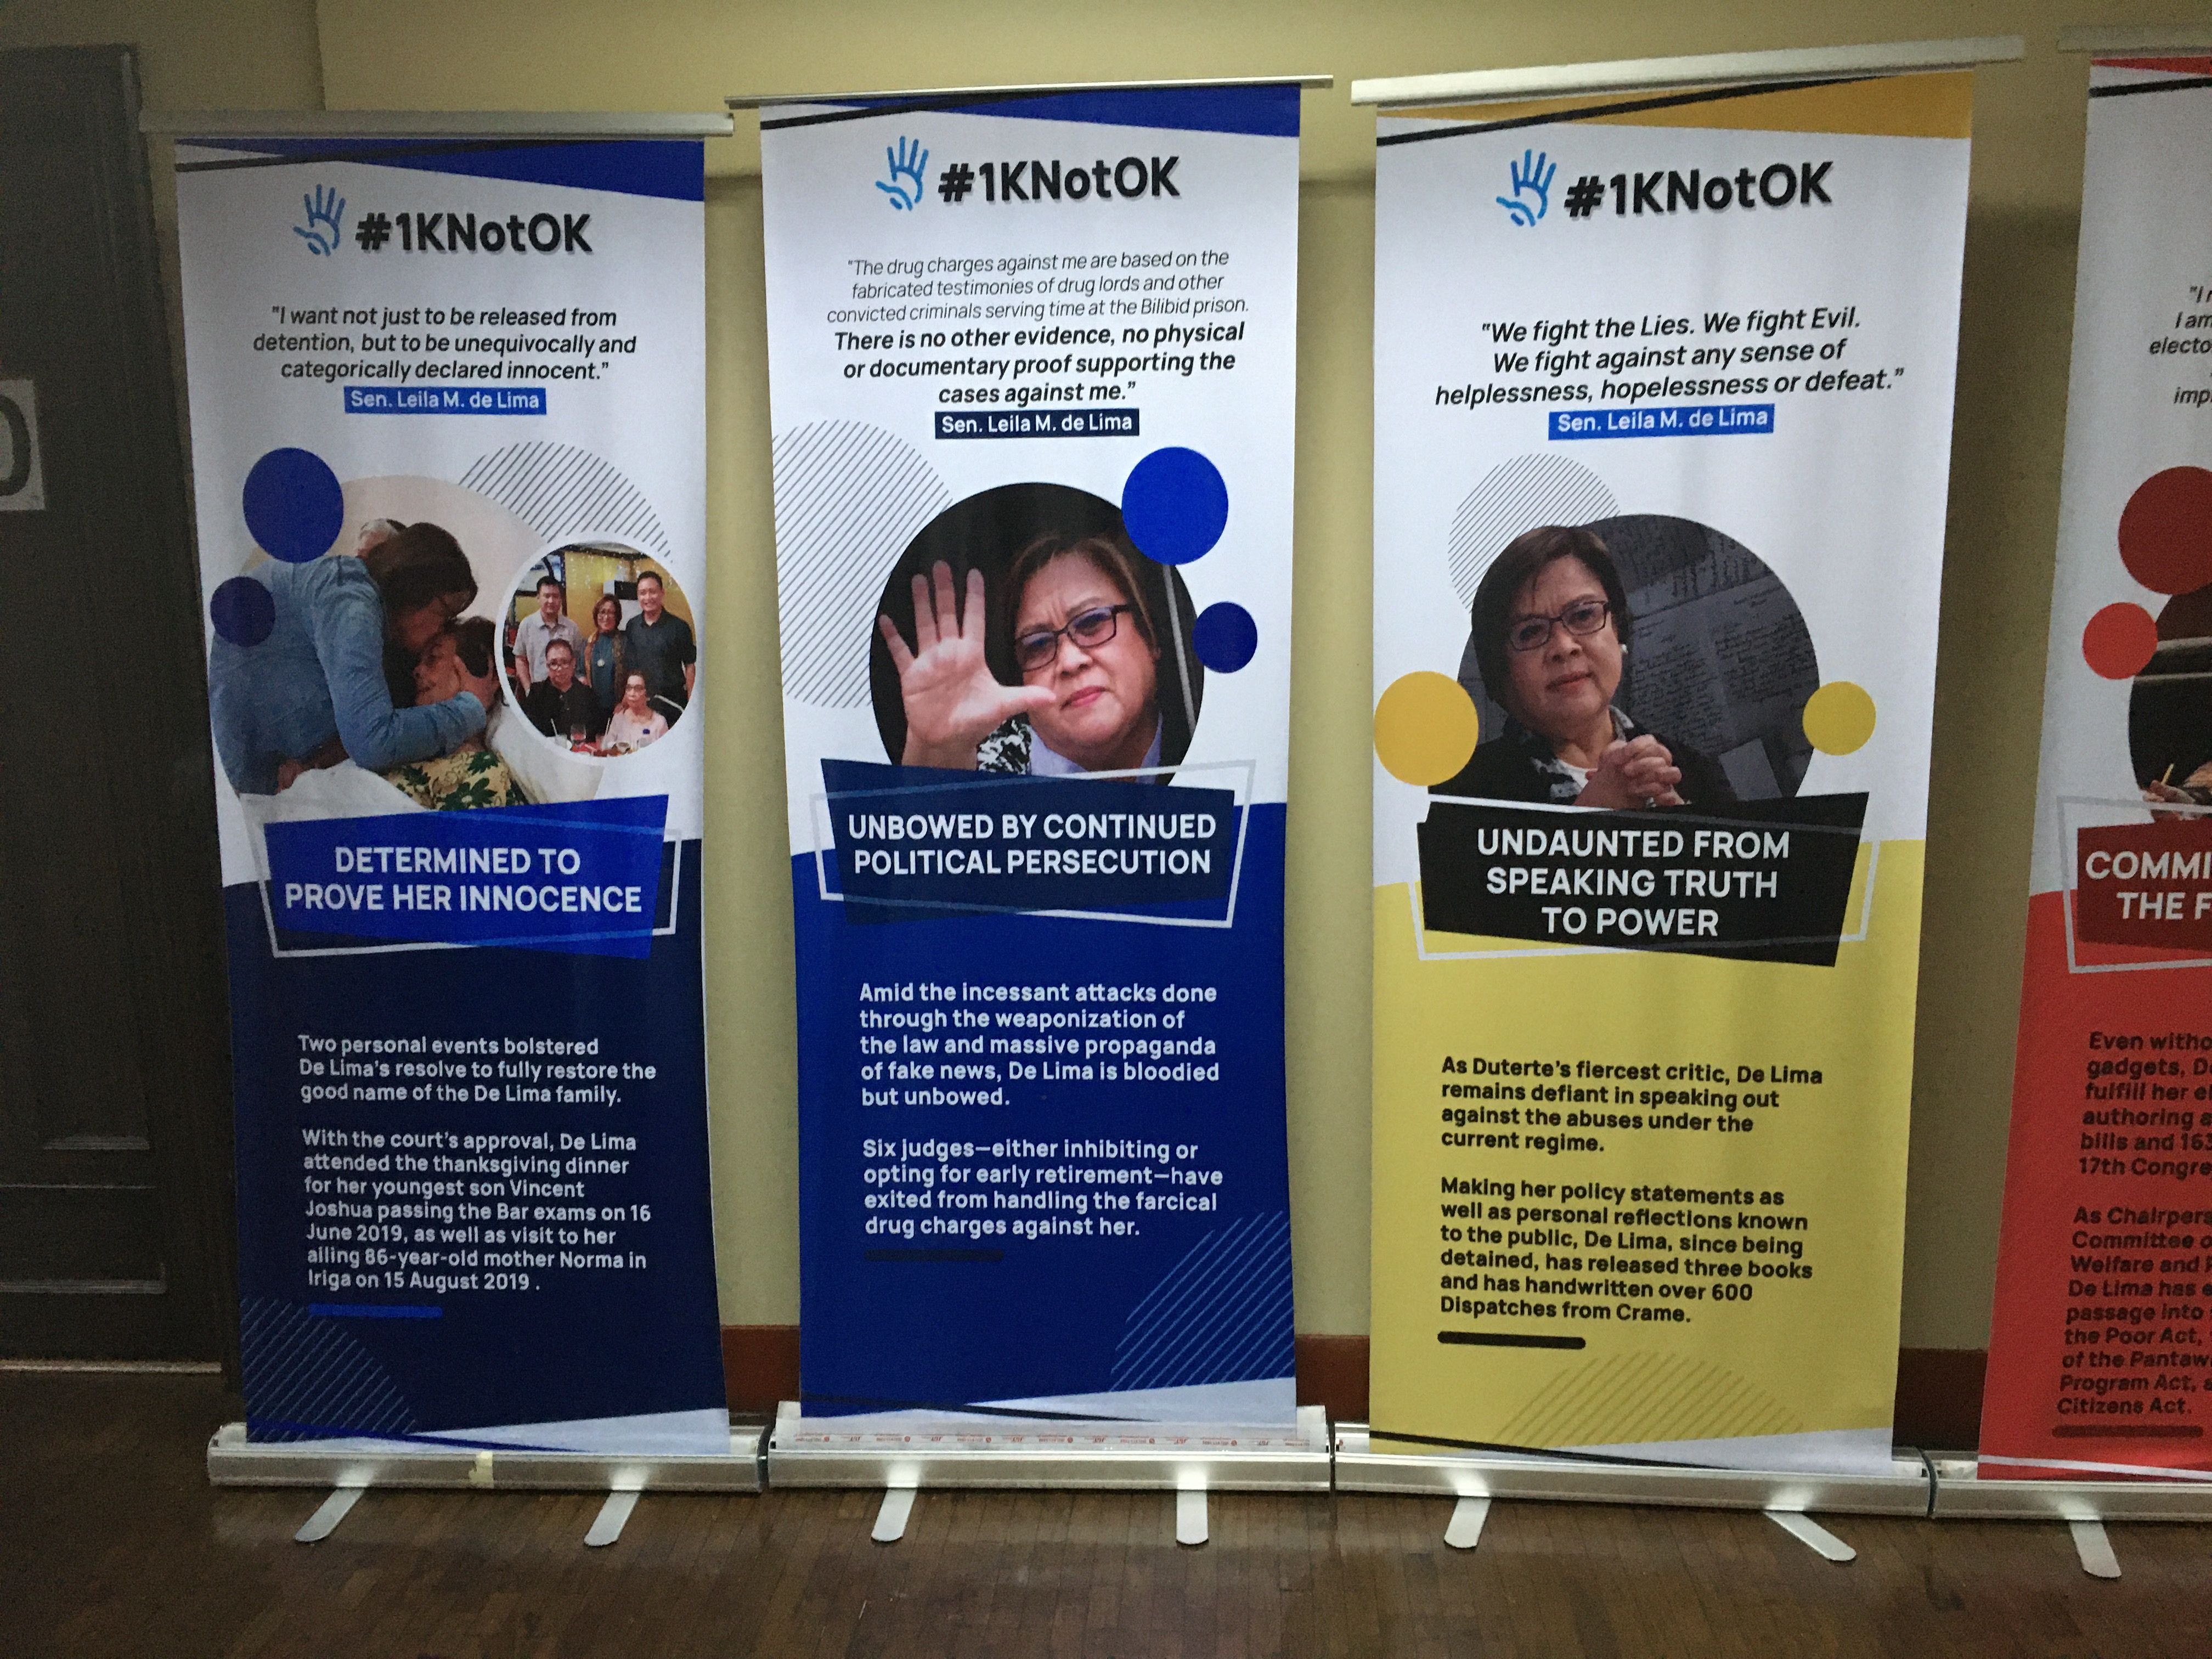 Posters of opposition politician Leila de Lima outside her office in the Philippine Senate.  De Lima, a sharp critic of Filipino president Rodrigo Duterte, has been in prison for more than three years on what legal experts, human rights organizations, and fellow opposition politicians believe to be trumped up charges of drug trafficking. Image by Richard Bernstein. Philippines, 2019.